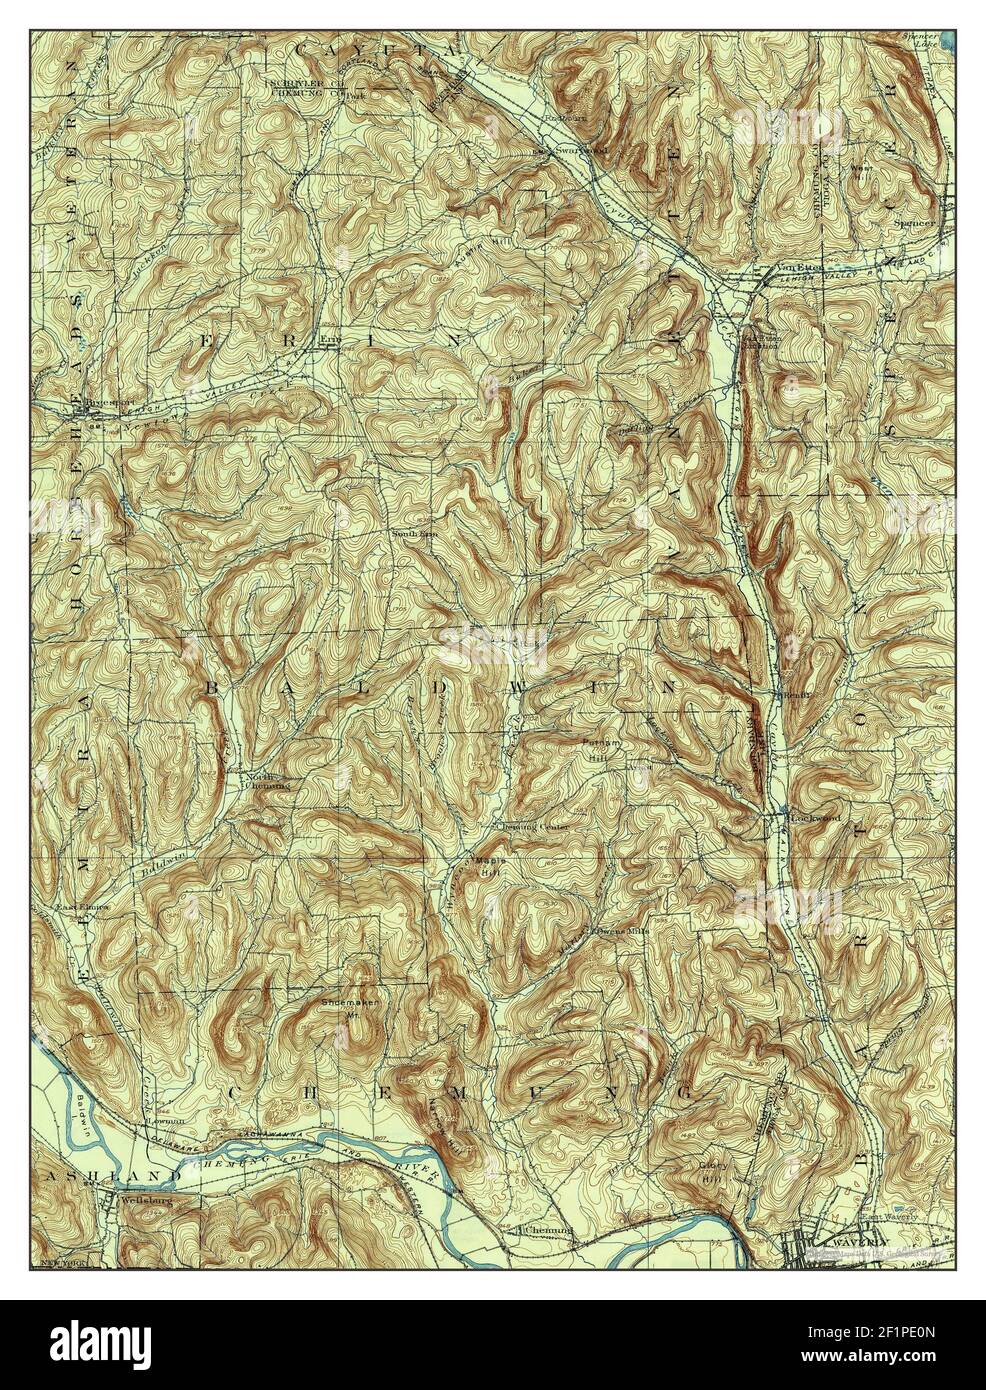 Waverly, New York, map 1902, 1:62500, United States of America by Timeless Maps, data U.S. Geological Survey Stock Photo